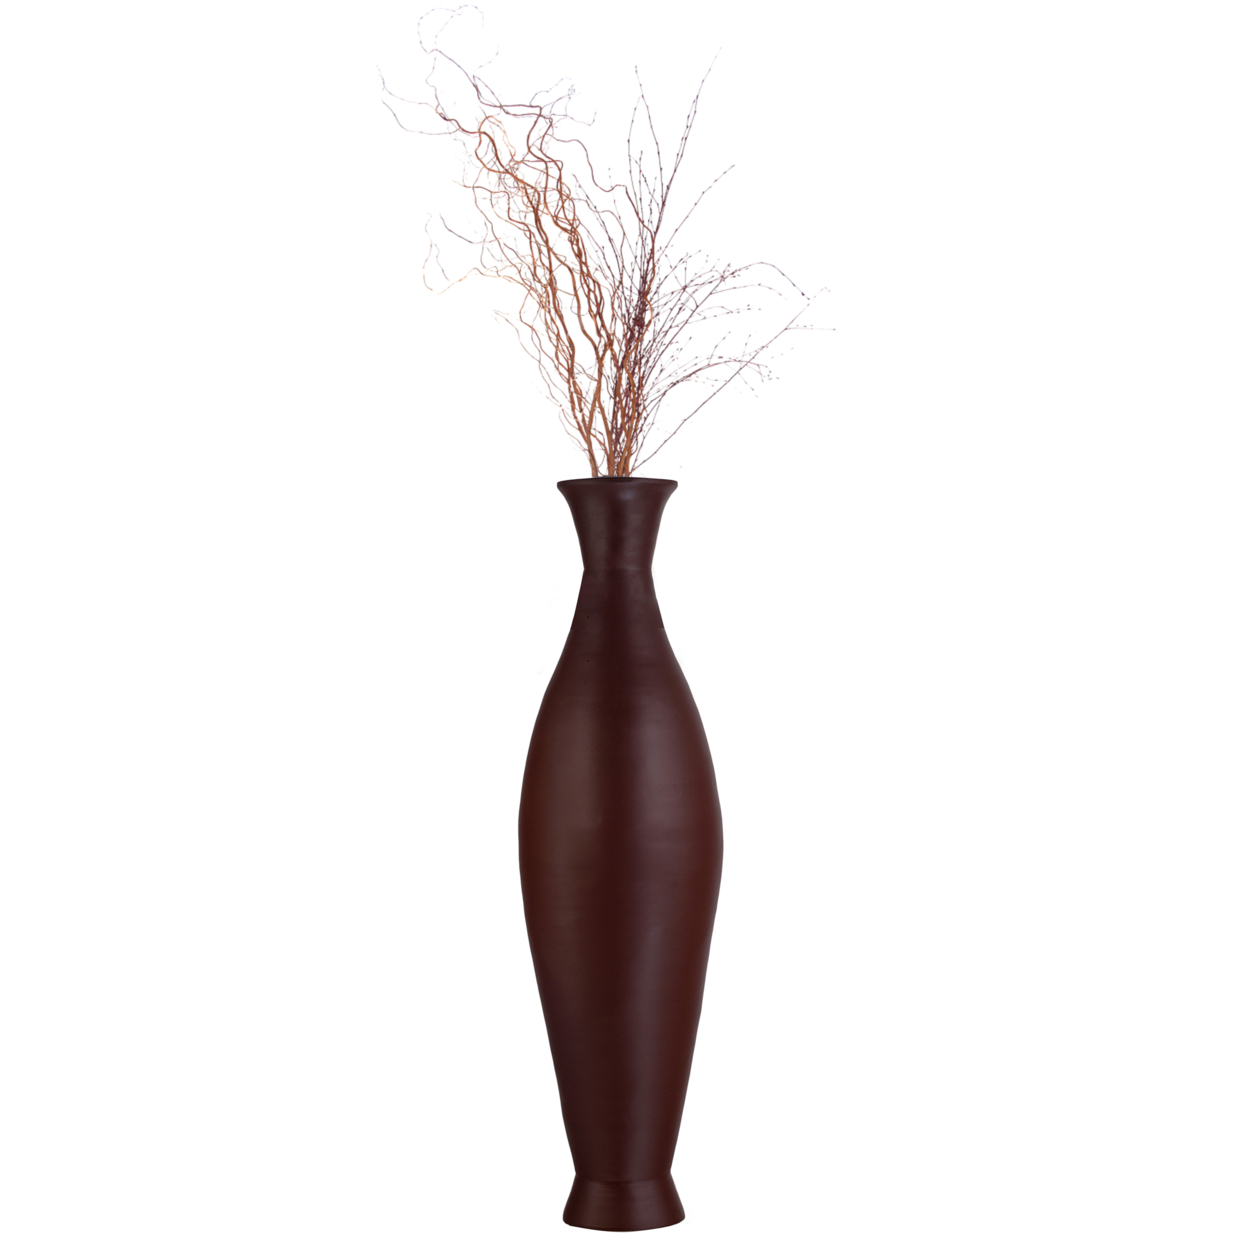 Modern Decorative Bamboo Floor Flower Vase For Living Room, Entryway Or Dining, Fill Up With Dried Branches Or Flowers, 43 Inch - Brown